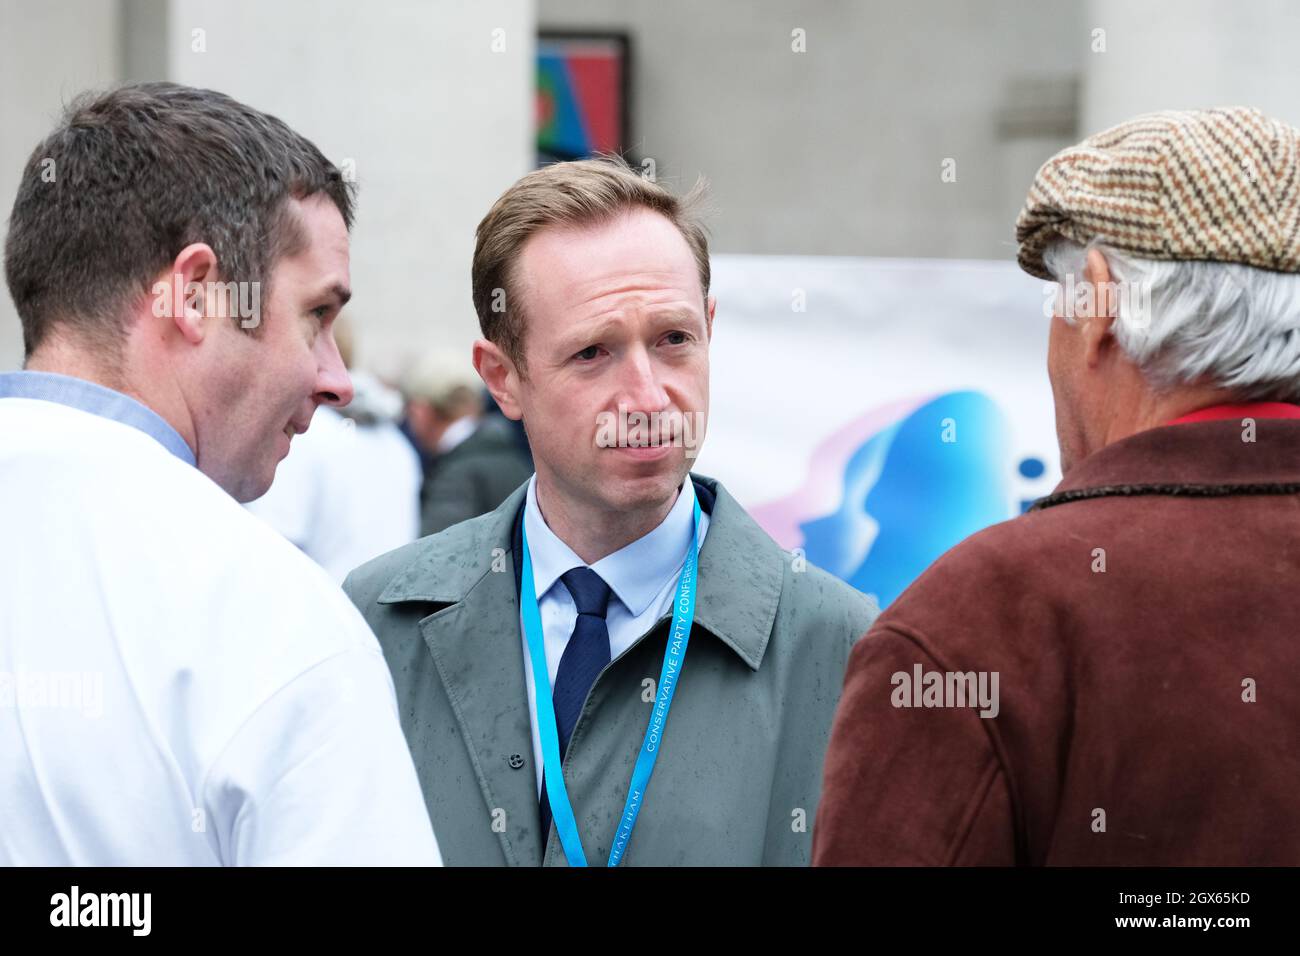 Manchester, UK – Monday 4th October 2021 – BBC News political correspondent Adam Fleming ( centre ) outside the Conservative Party Conference in Manchester talking with pork producers. Photo Steven May / Alamy Live News Stock Photo